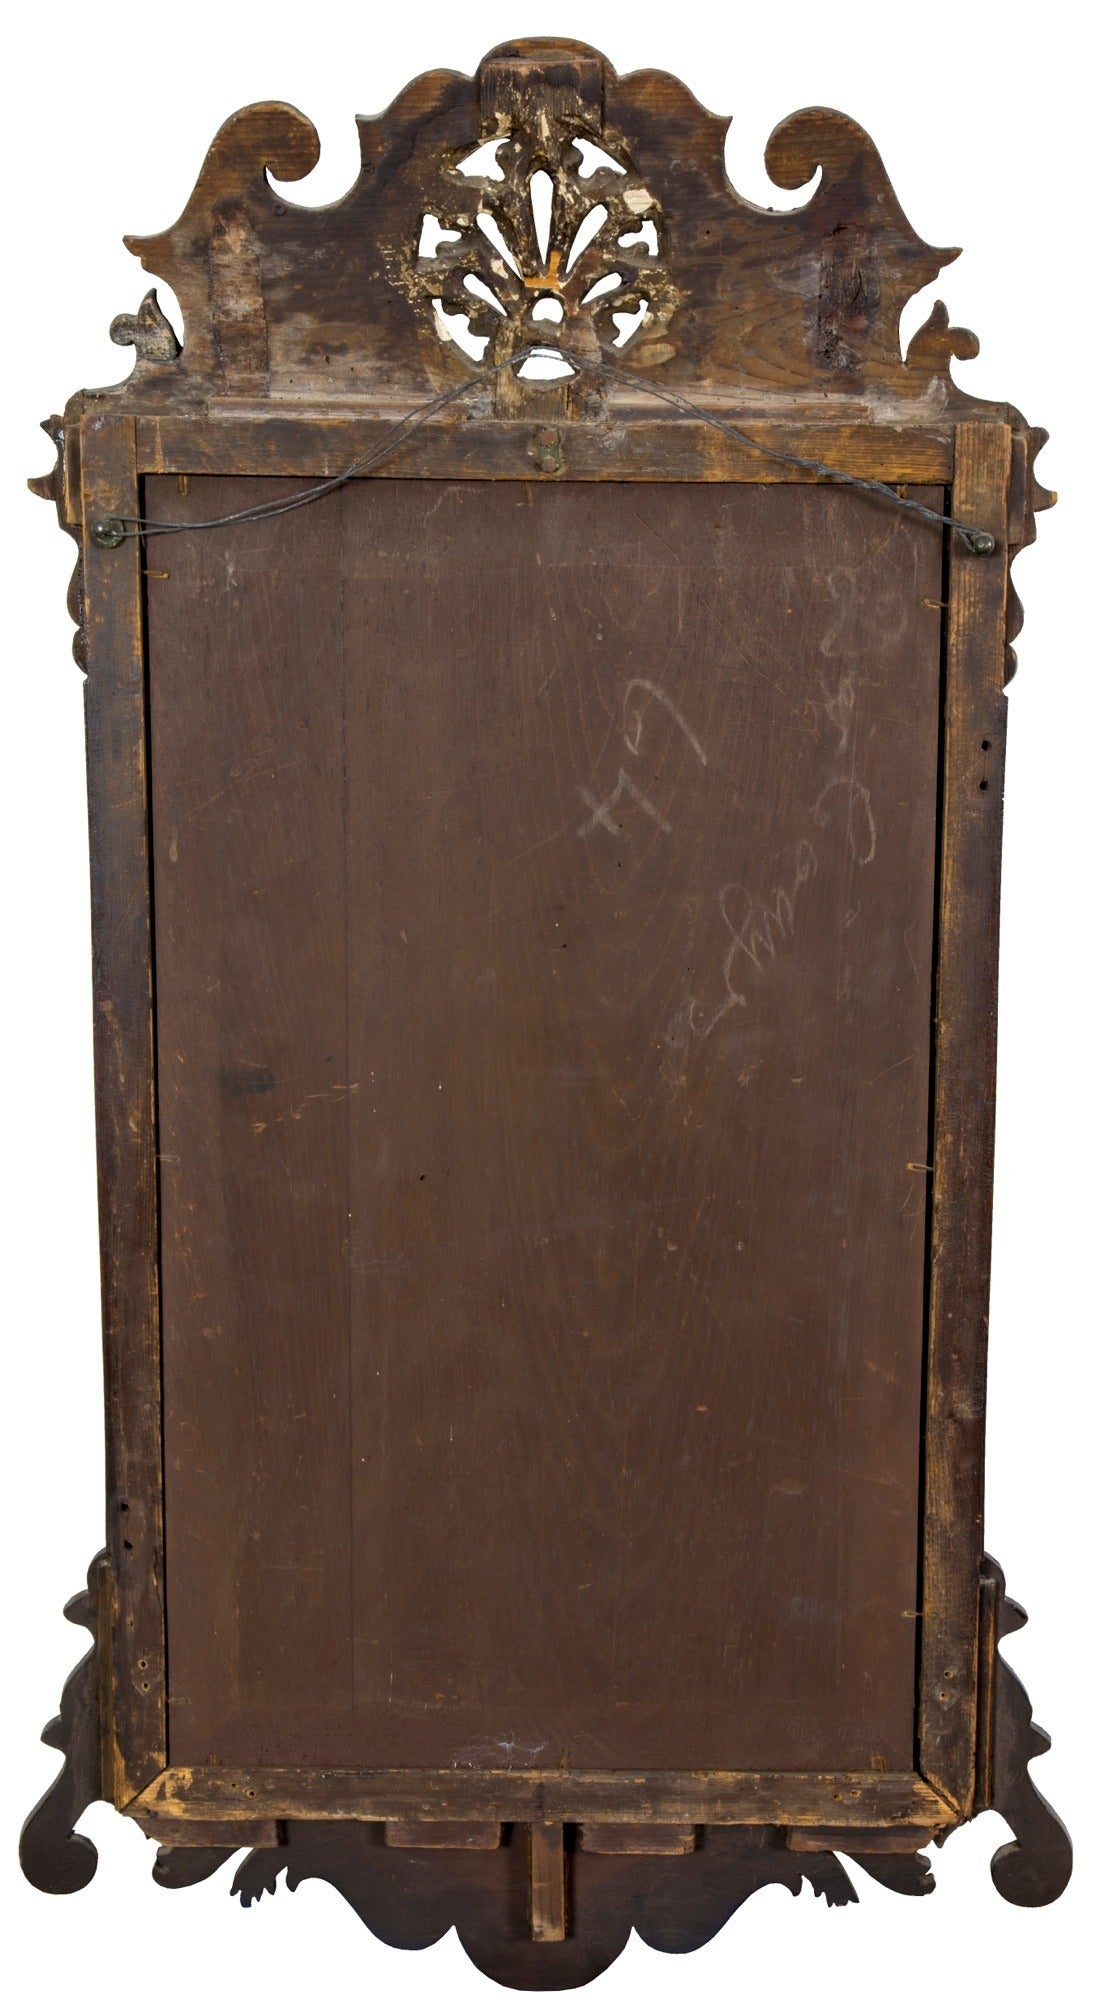 This is a very compelling mirror of great depth and beauty. It is of mid-size. The walnut has a rich, old tone with shrinkage cracks running up and down its gilt border. If the wood is of the period, than this is what to expect, and one test of